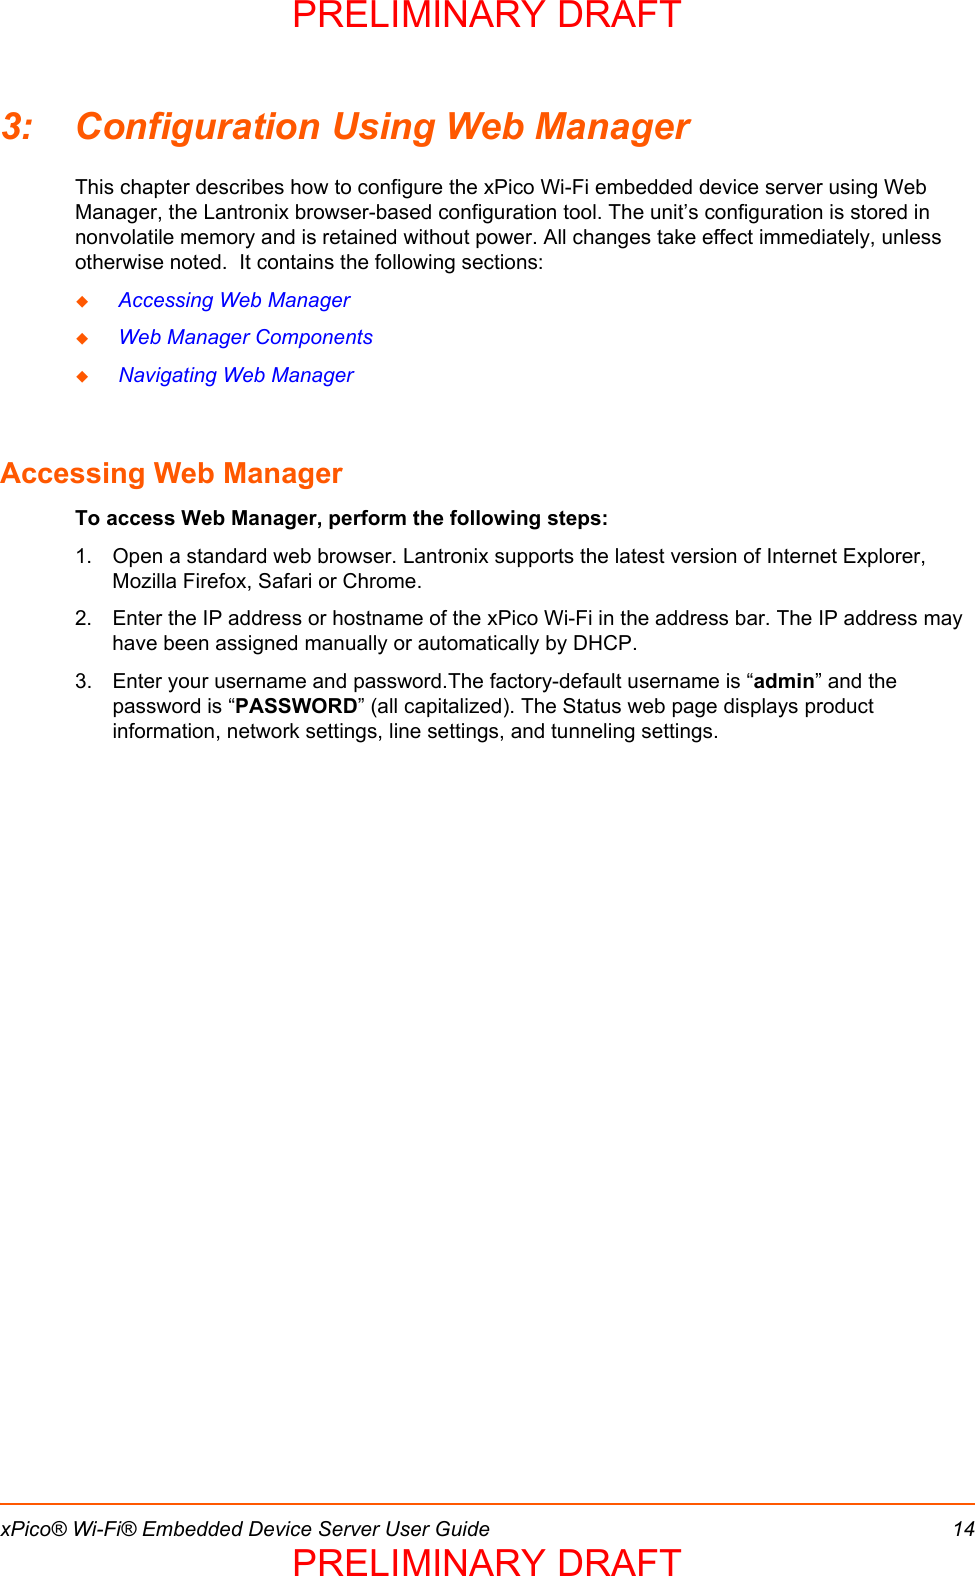 xPico® Wi-Fi® Embedded Device Server User Guide 143: Configuration Using Web ManagerThis chapter describes how to configure the xPico Wi-Fi embedded device server using Web Manager, the Lantronix browser-based configuration tool. The unit’s configuration is stored in nonvolatile memory and is retained without power. All changes take effect immediately, unless otherwise noted.  It contains the following sections: Accessing Web Manager Web Manager Components Navigating Web ManagerAccessing Web ManagerTo access Web Manager, perform the following steps:1. Open a standard web browser. Lantronix supports the latest version of Internet Explorer, Mozilla Firefox, Safari or Chrome. 2. Enter the IP address or hostname of the xPico Wi-Fi in the address bar. The IP address may have been assigned manually or automatically by DHCP. 3. Enter your username and password.The factory-default username is “admin” and the password is “PASSWORD” (all capitalized). The Status web page displays product information, network settings, line settings, and tunneling settings.  PRELIMINARY DRAFTPRELIMINARY DRAFT